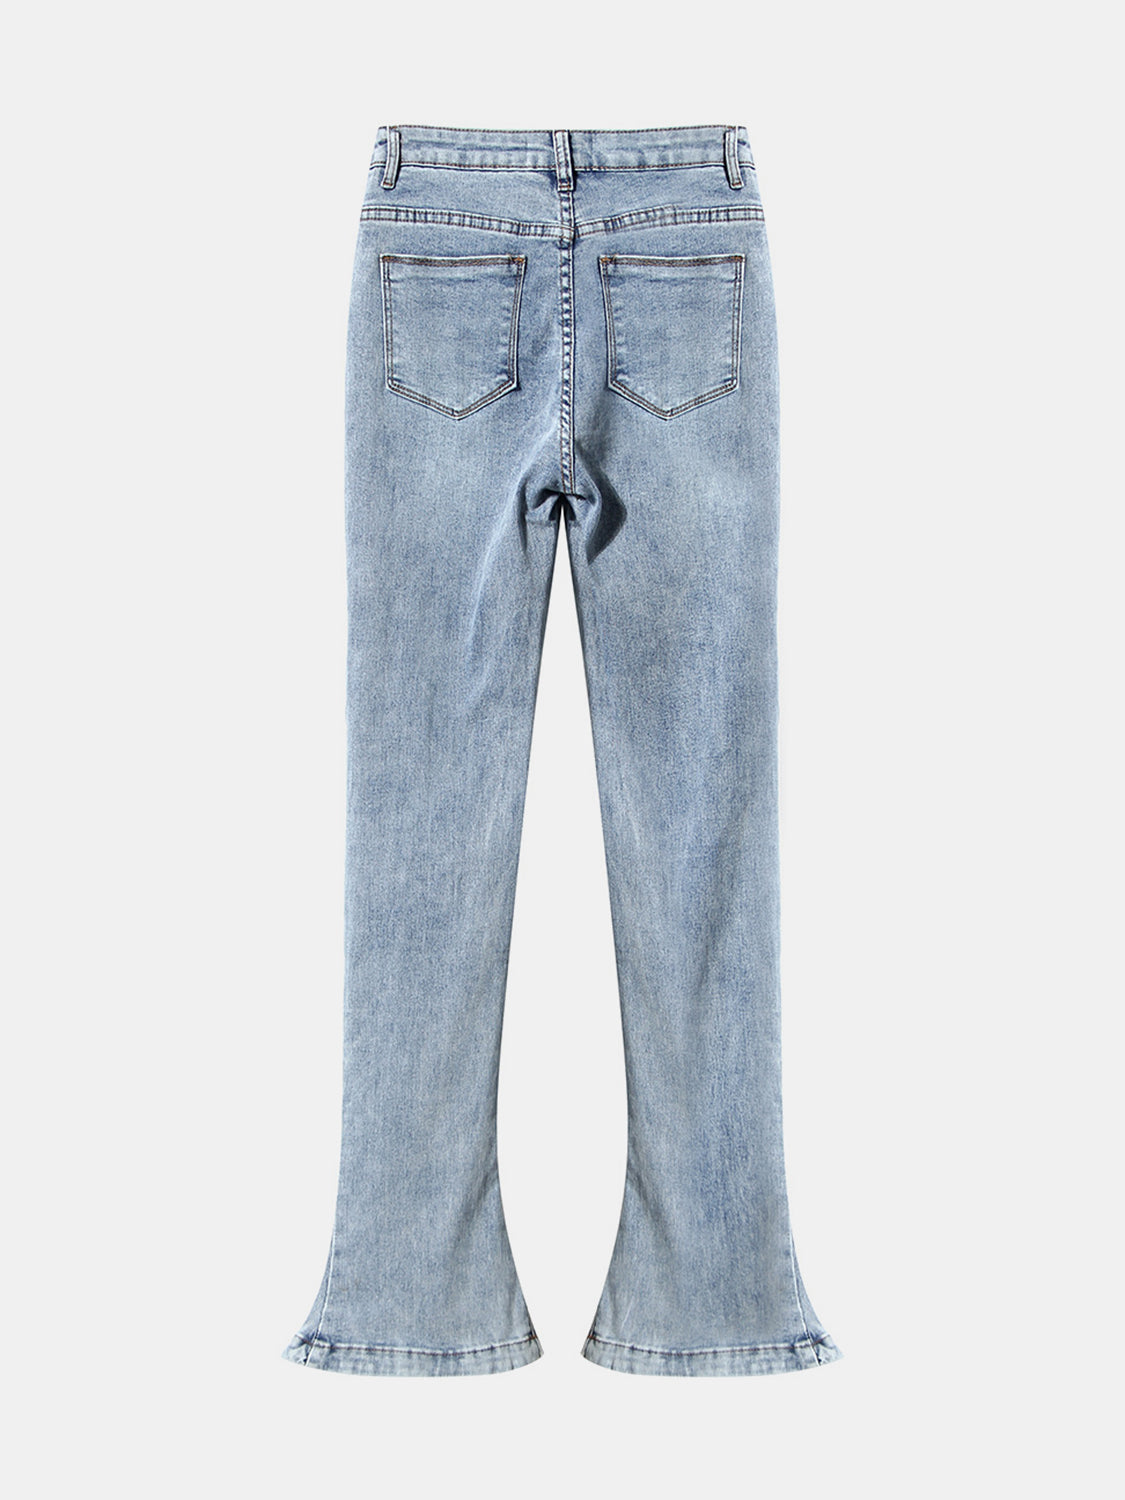 TEEK - Light Wash Buttoned Bootcut Pocketed Jeans JEANS TEEK Trend   